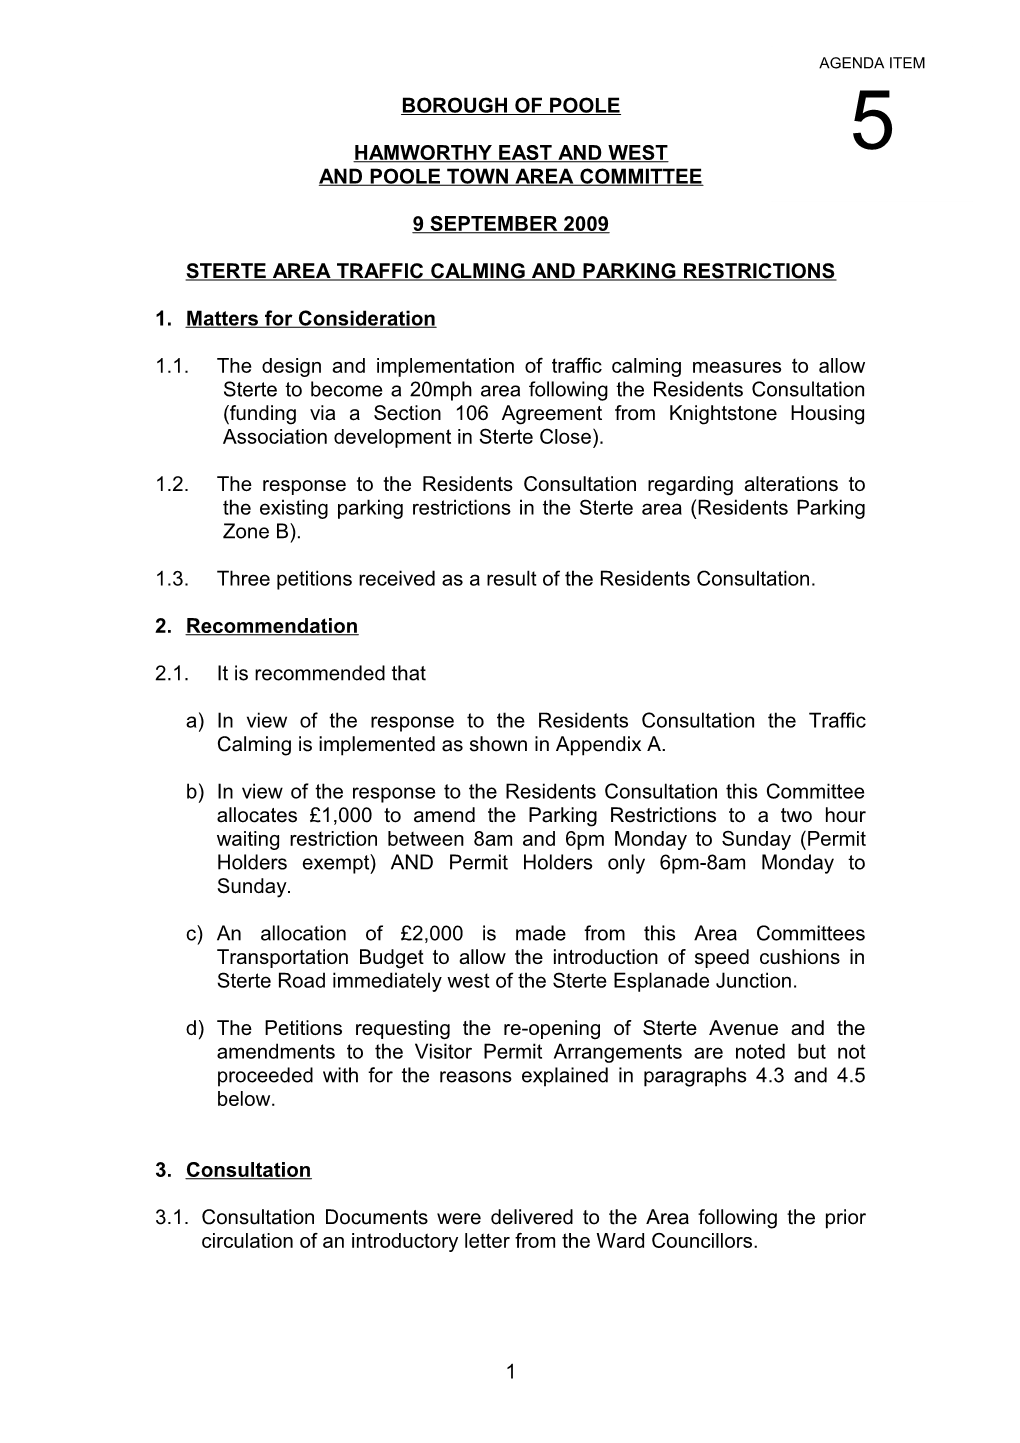 Sterte Area Traffic Calming and Parking Restrictions